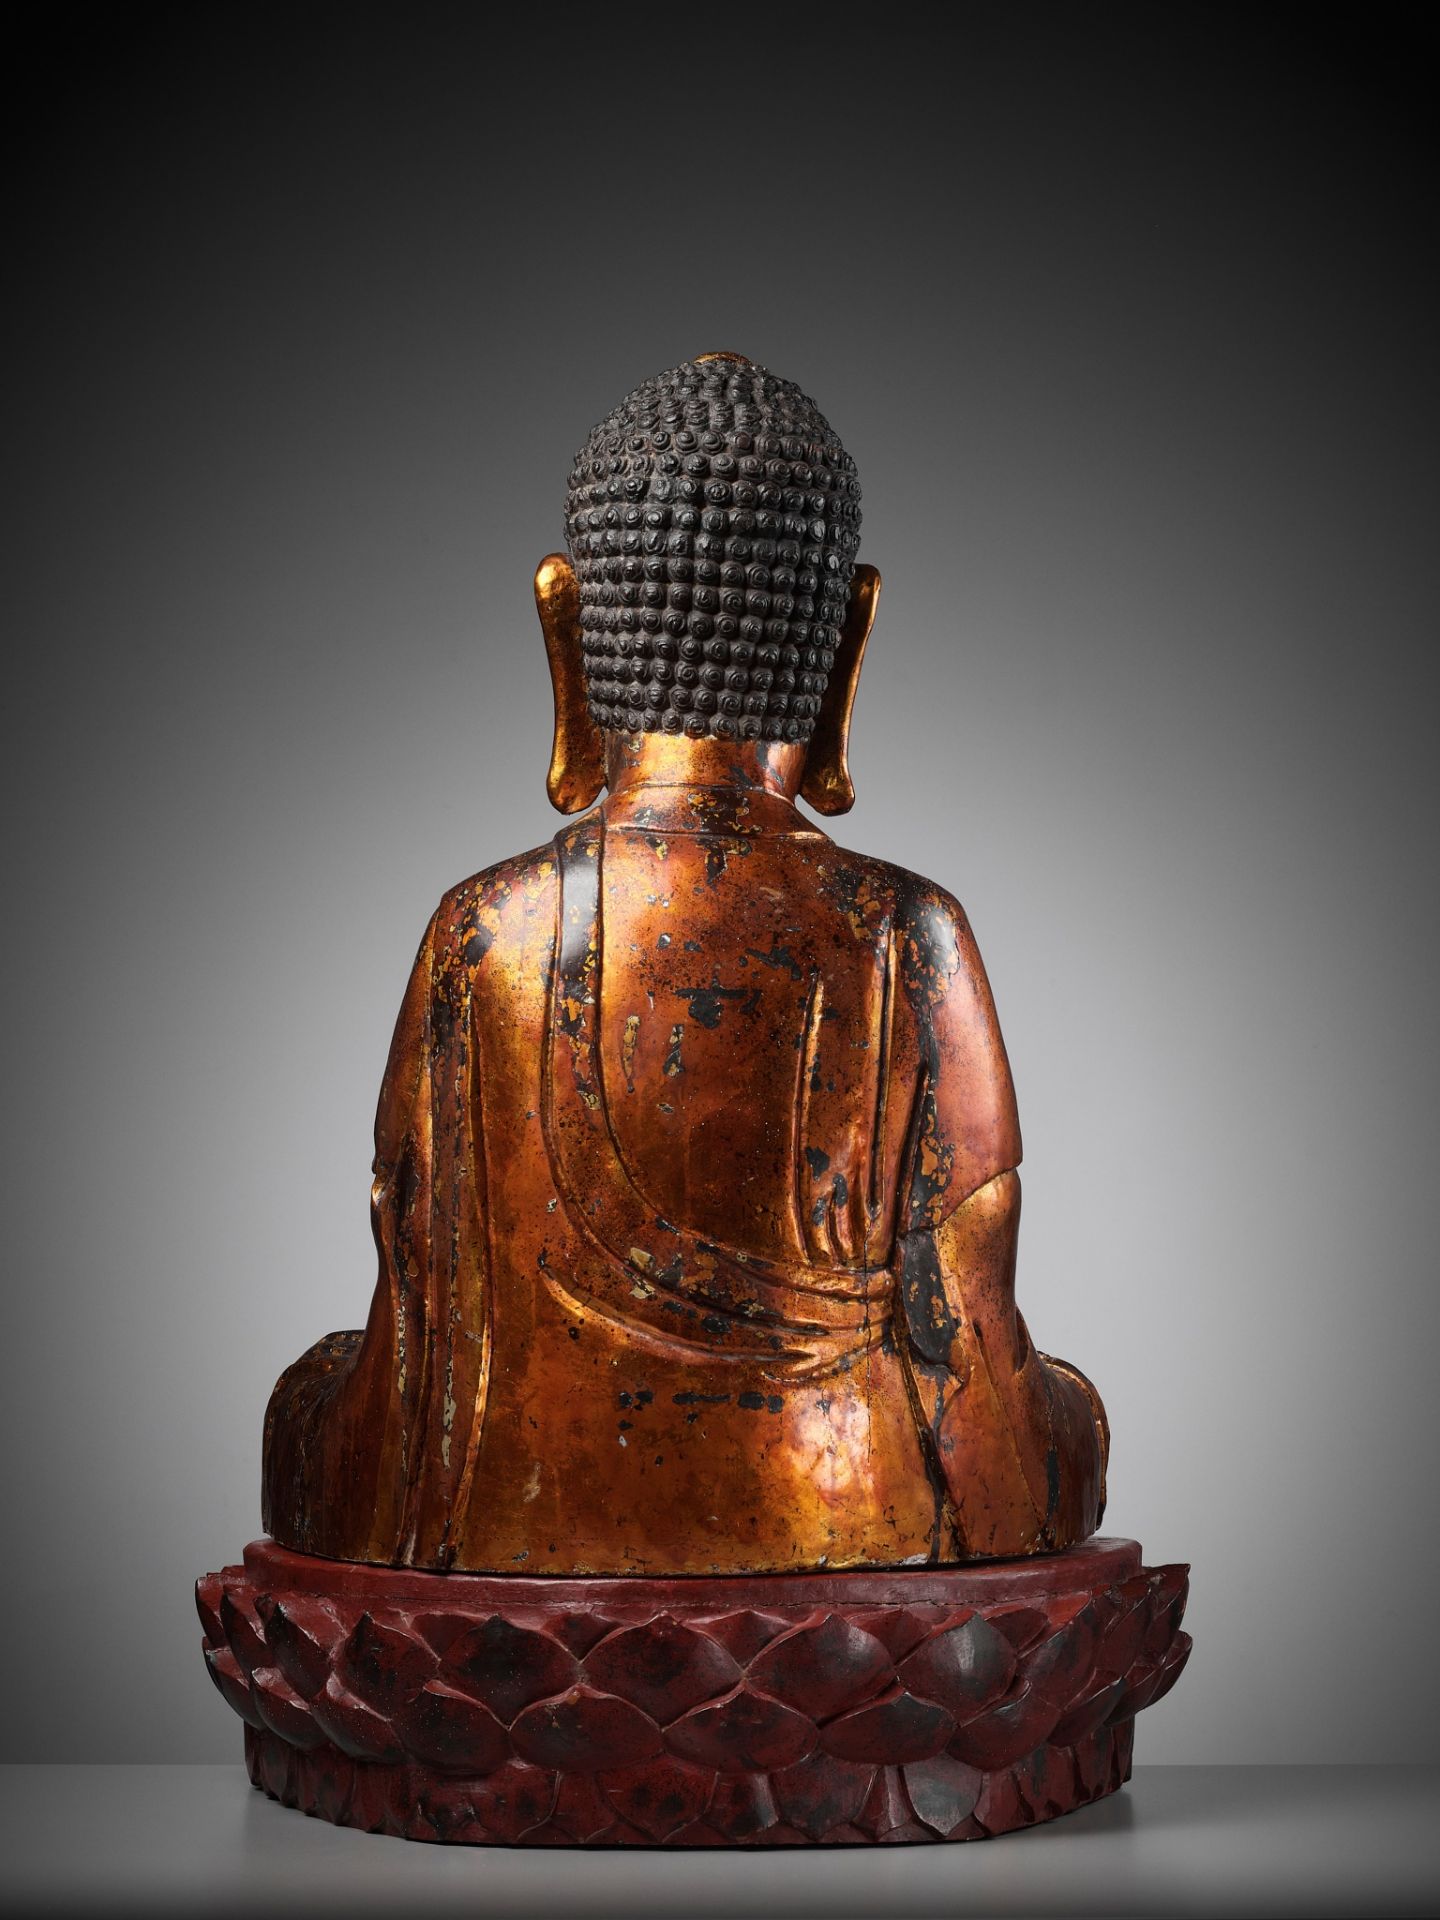 AN EXTRAORDINARY LARGE GILT-LACQUER WOOD STATUE OF BUDDHA, VIETNAM, 17TH-18TH CENTURY - Image 10 of 11